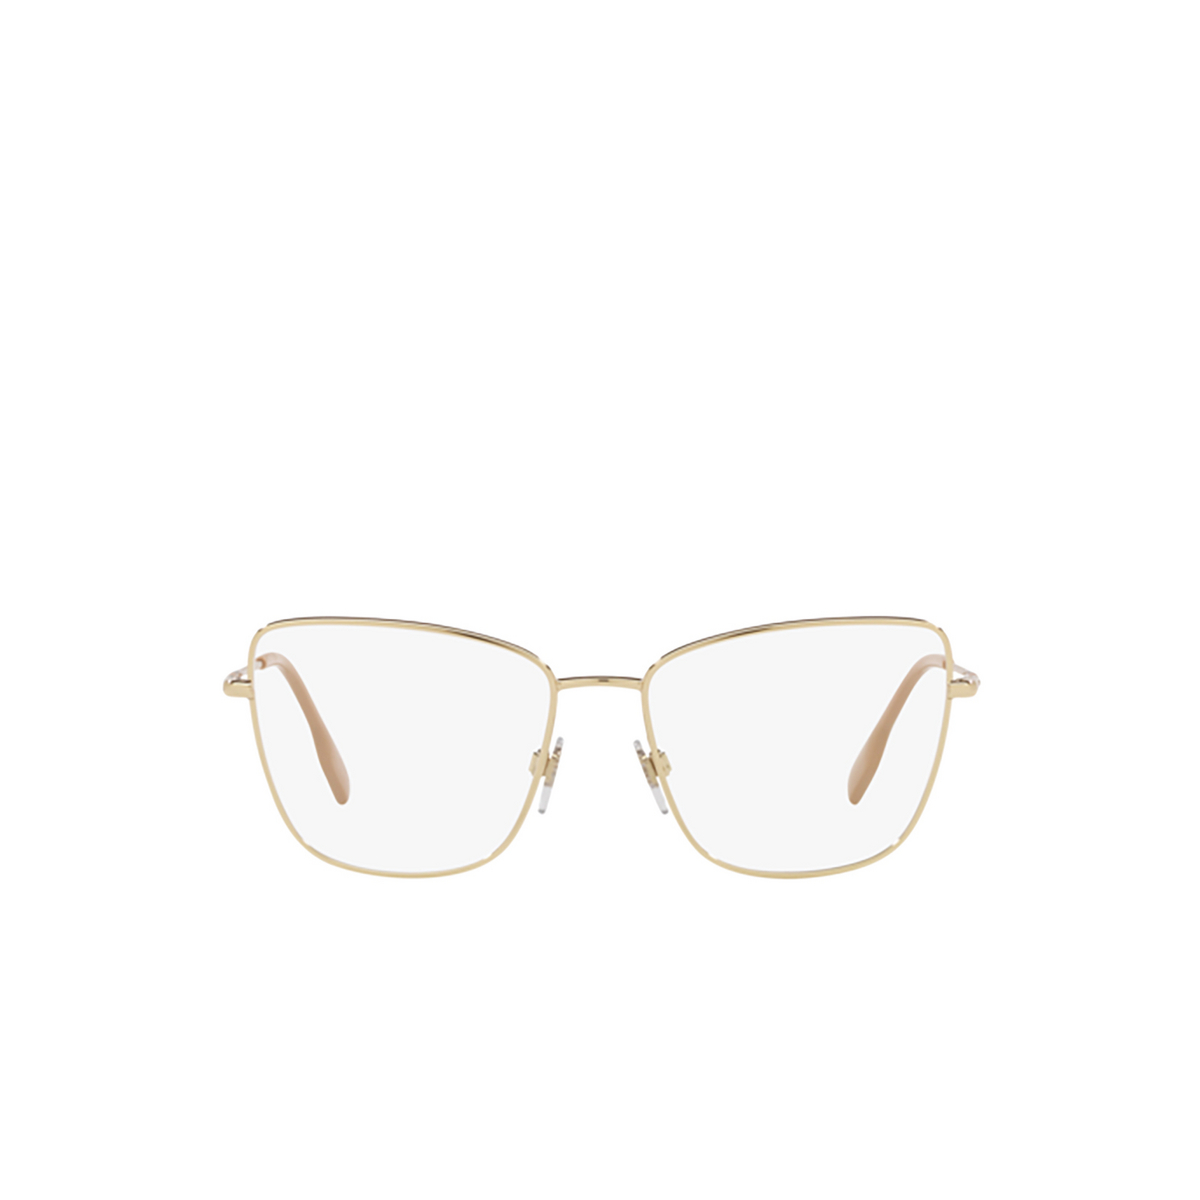 Burberry BEA Eyeglasses 1338 Light Gold - front view